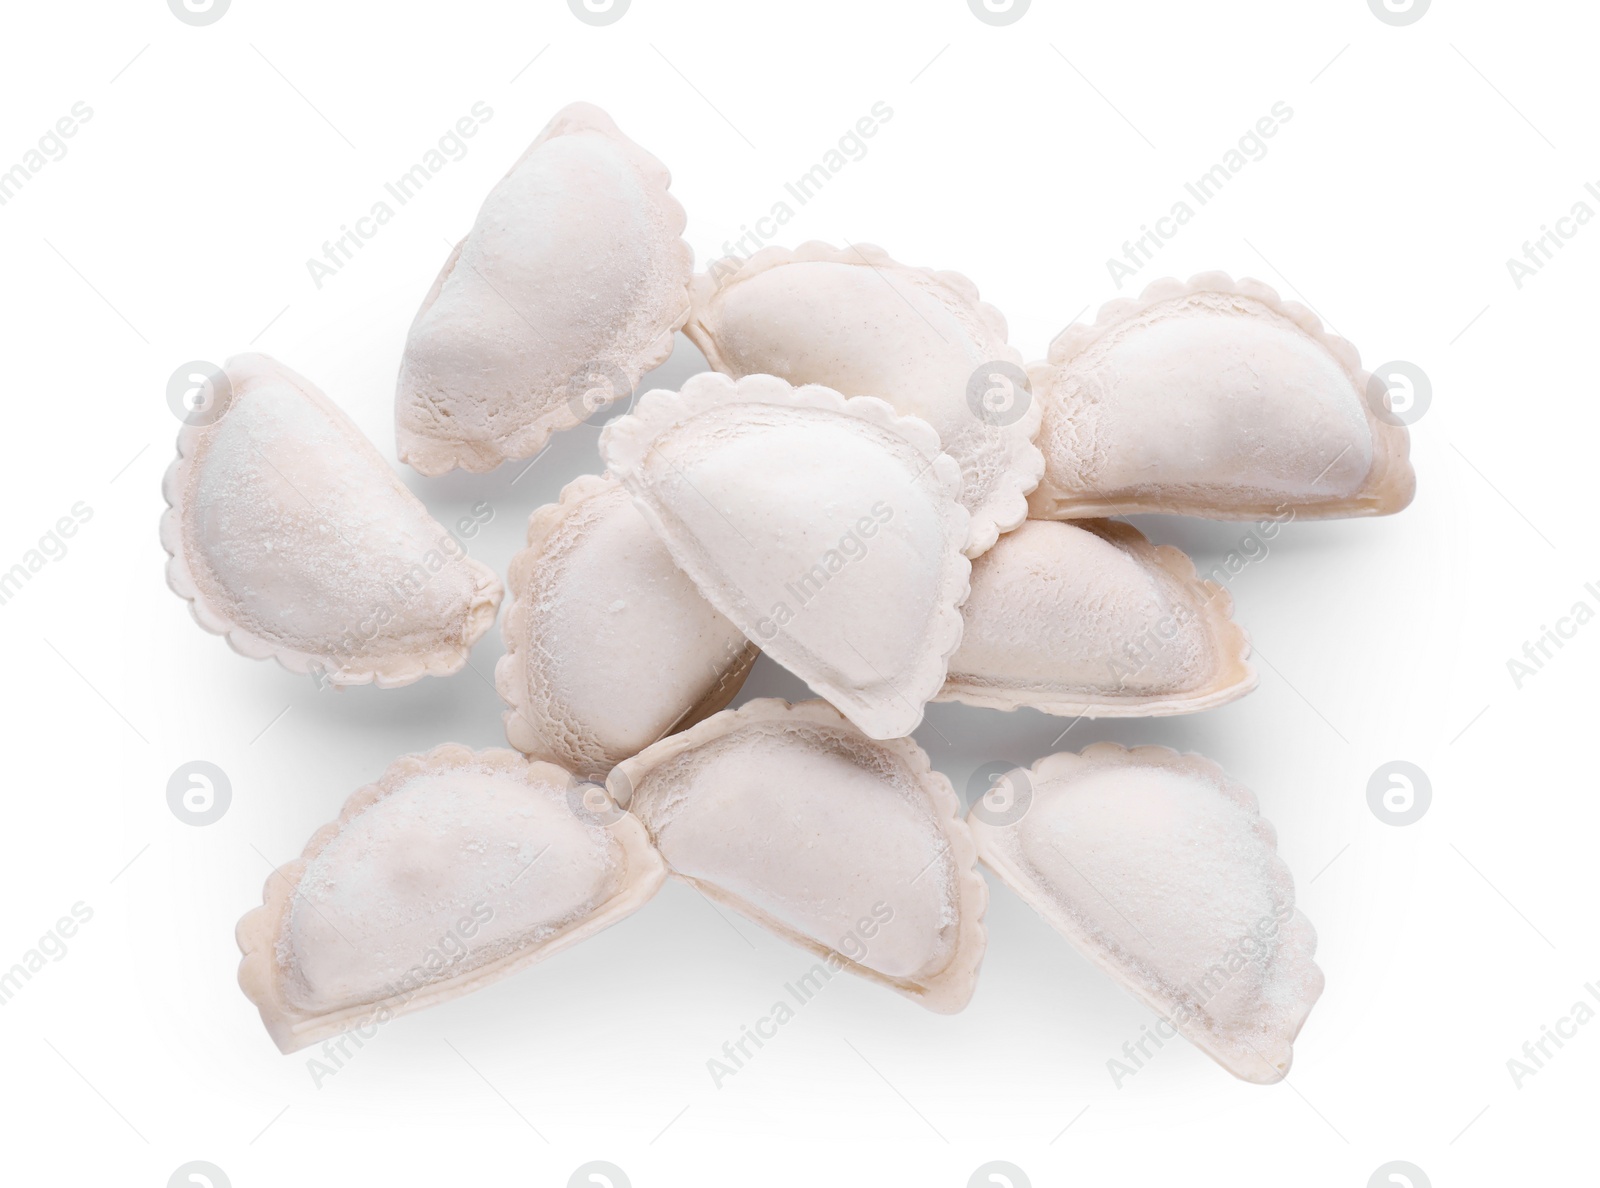 Photo of Pile of raw dumplings (varenyky) on white background, top view